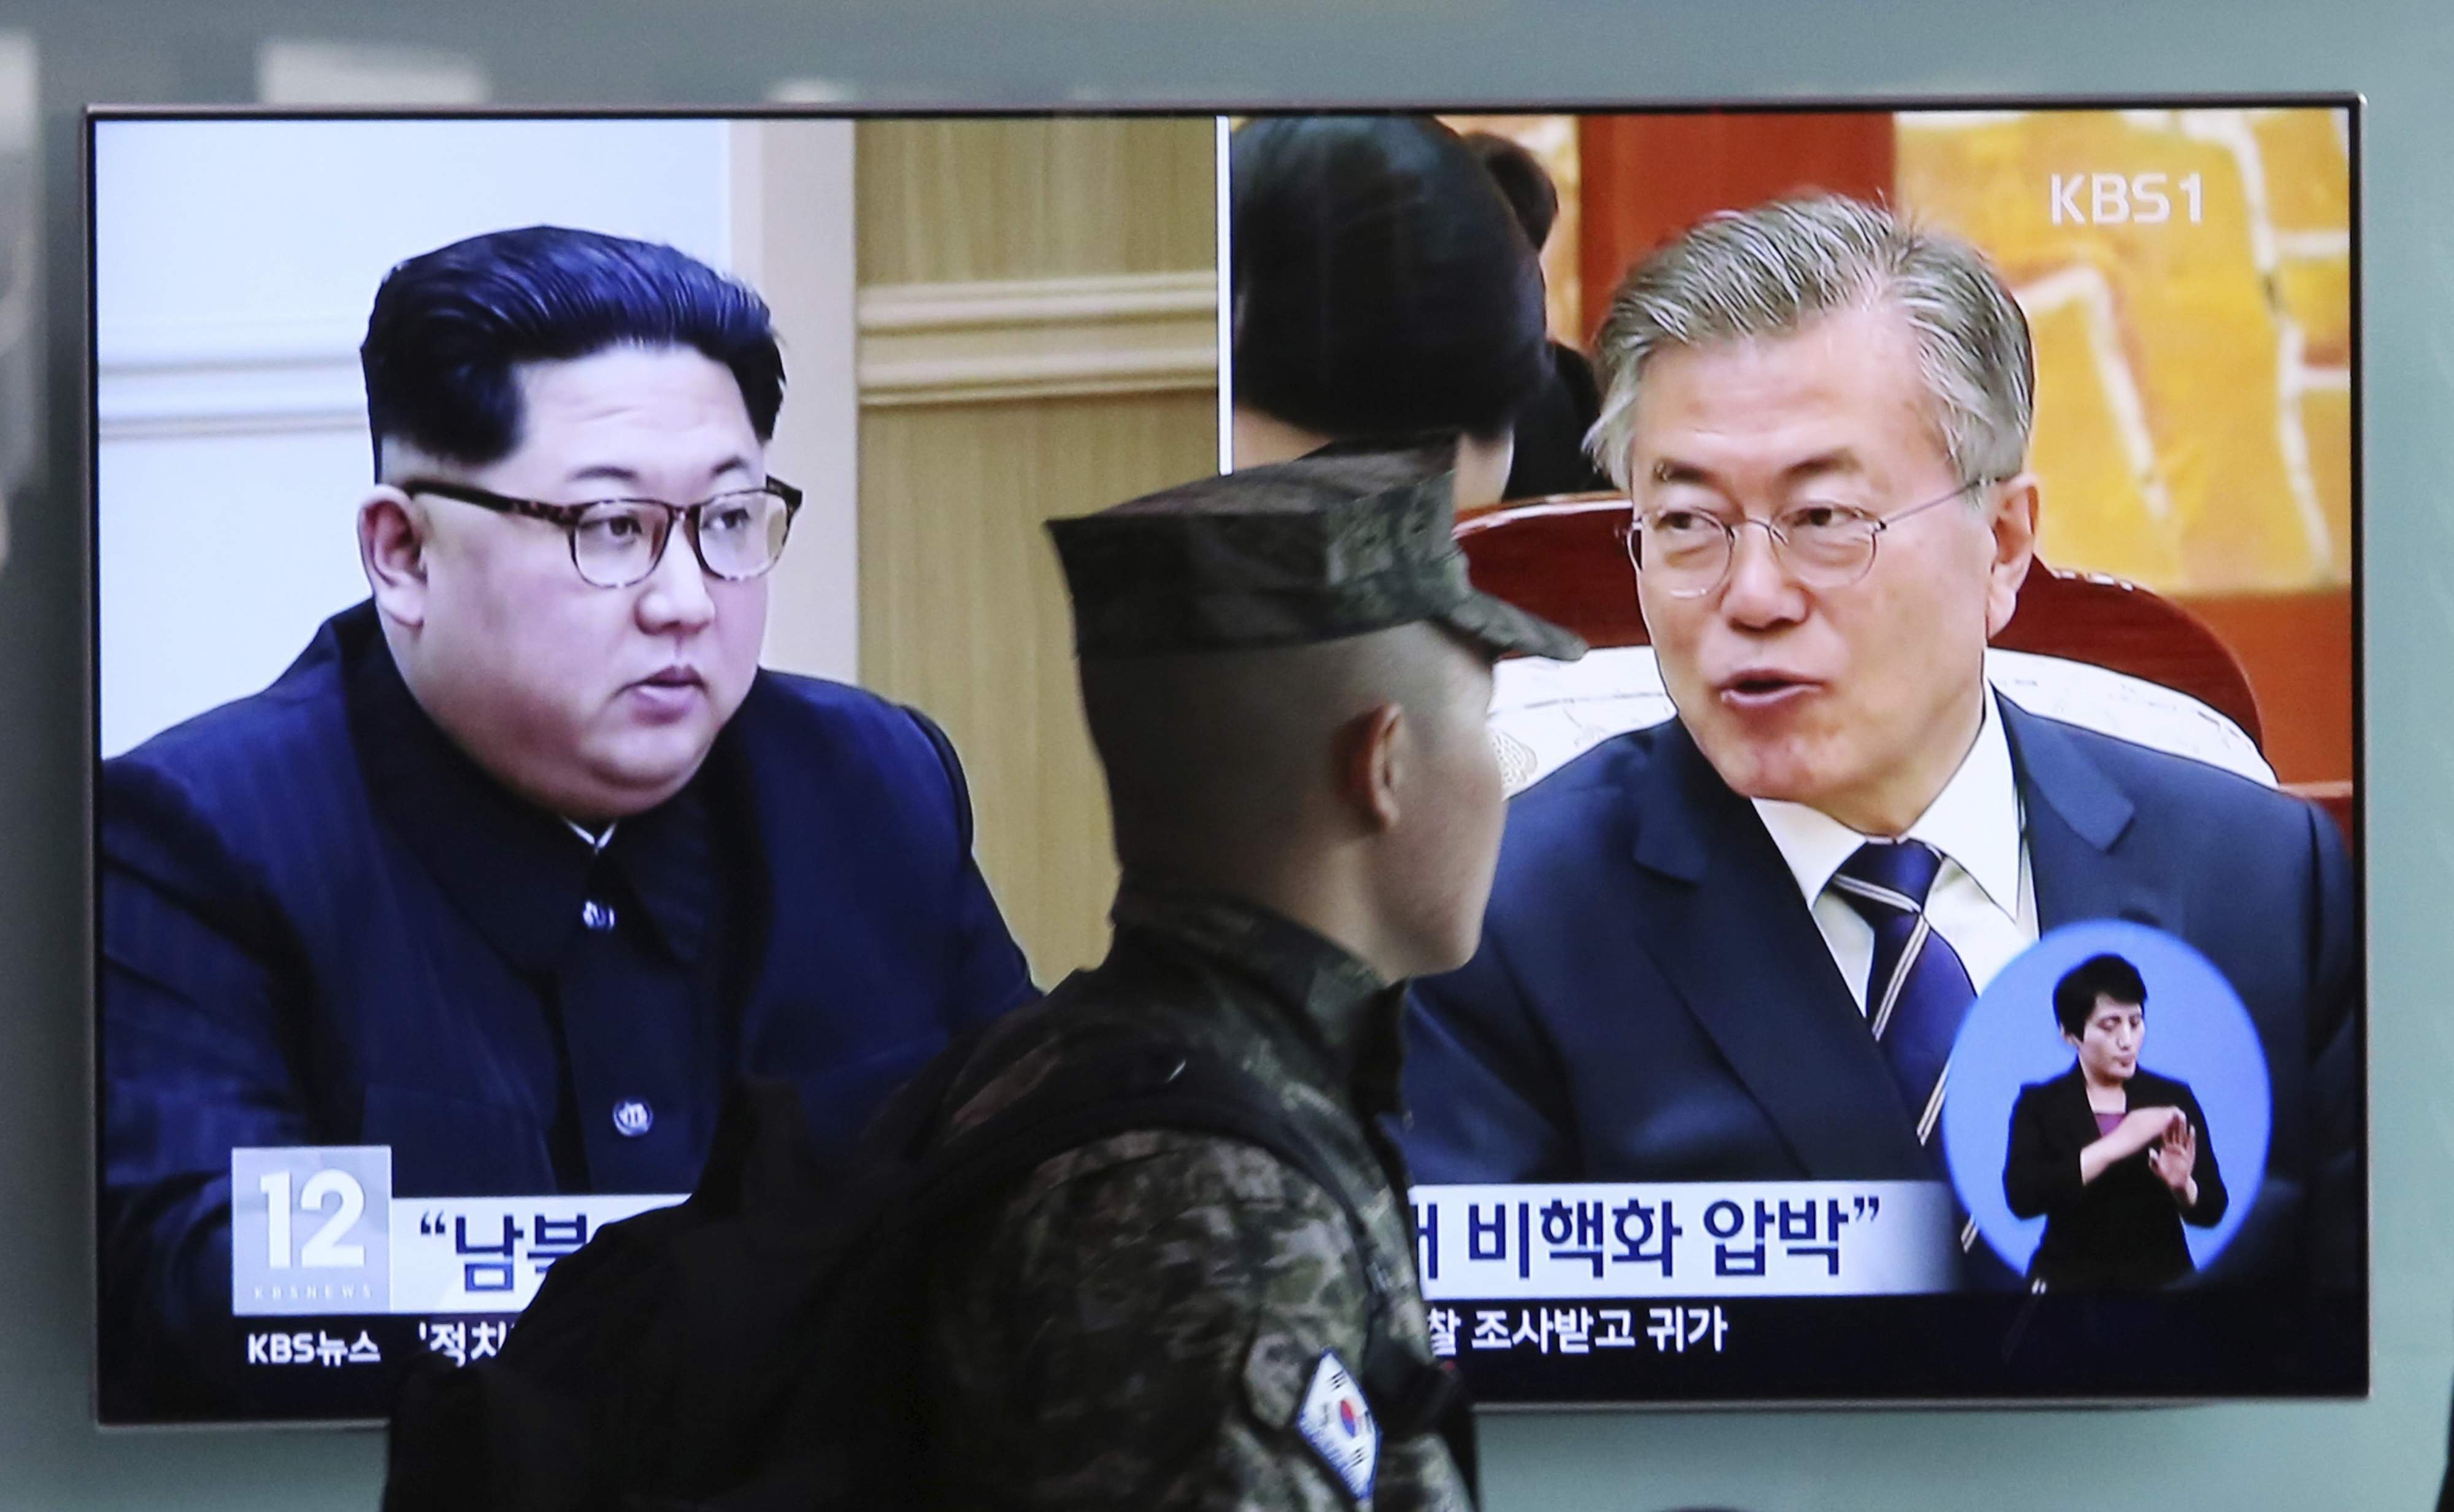 North and South Korea open hotline between leaders: Seoul